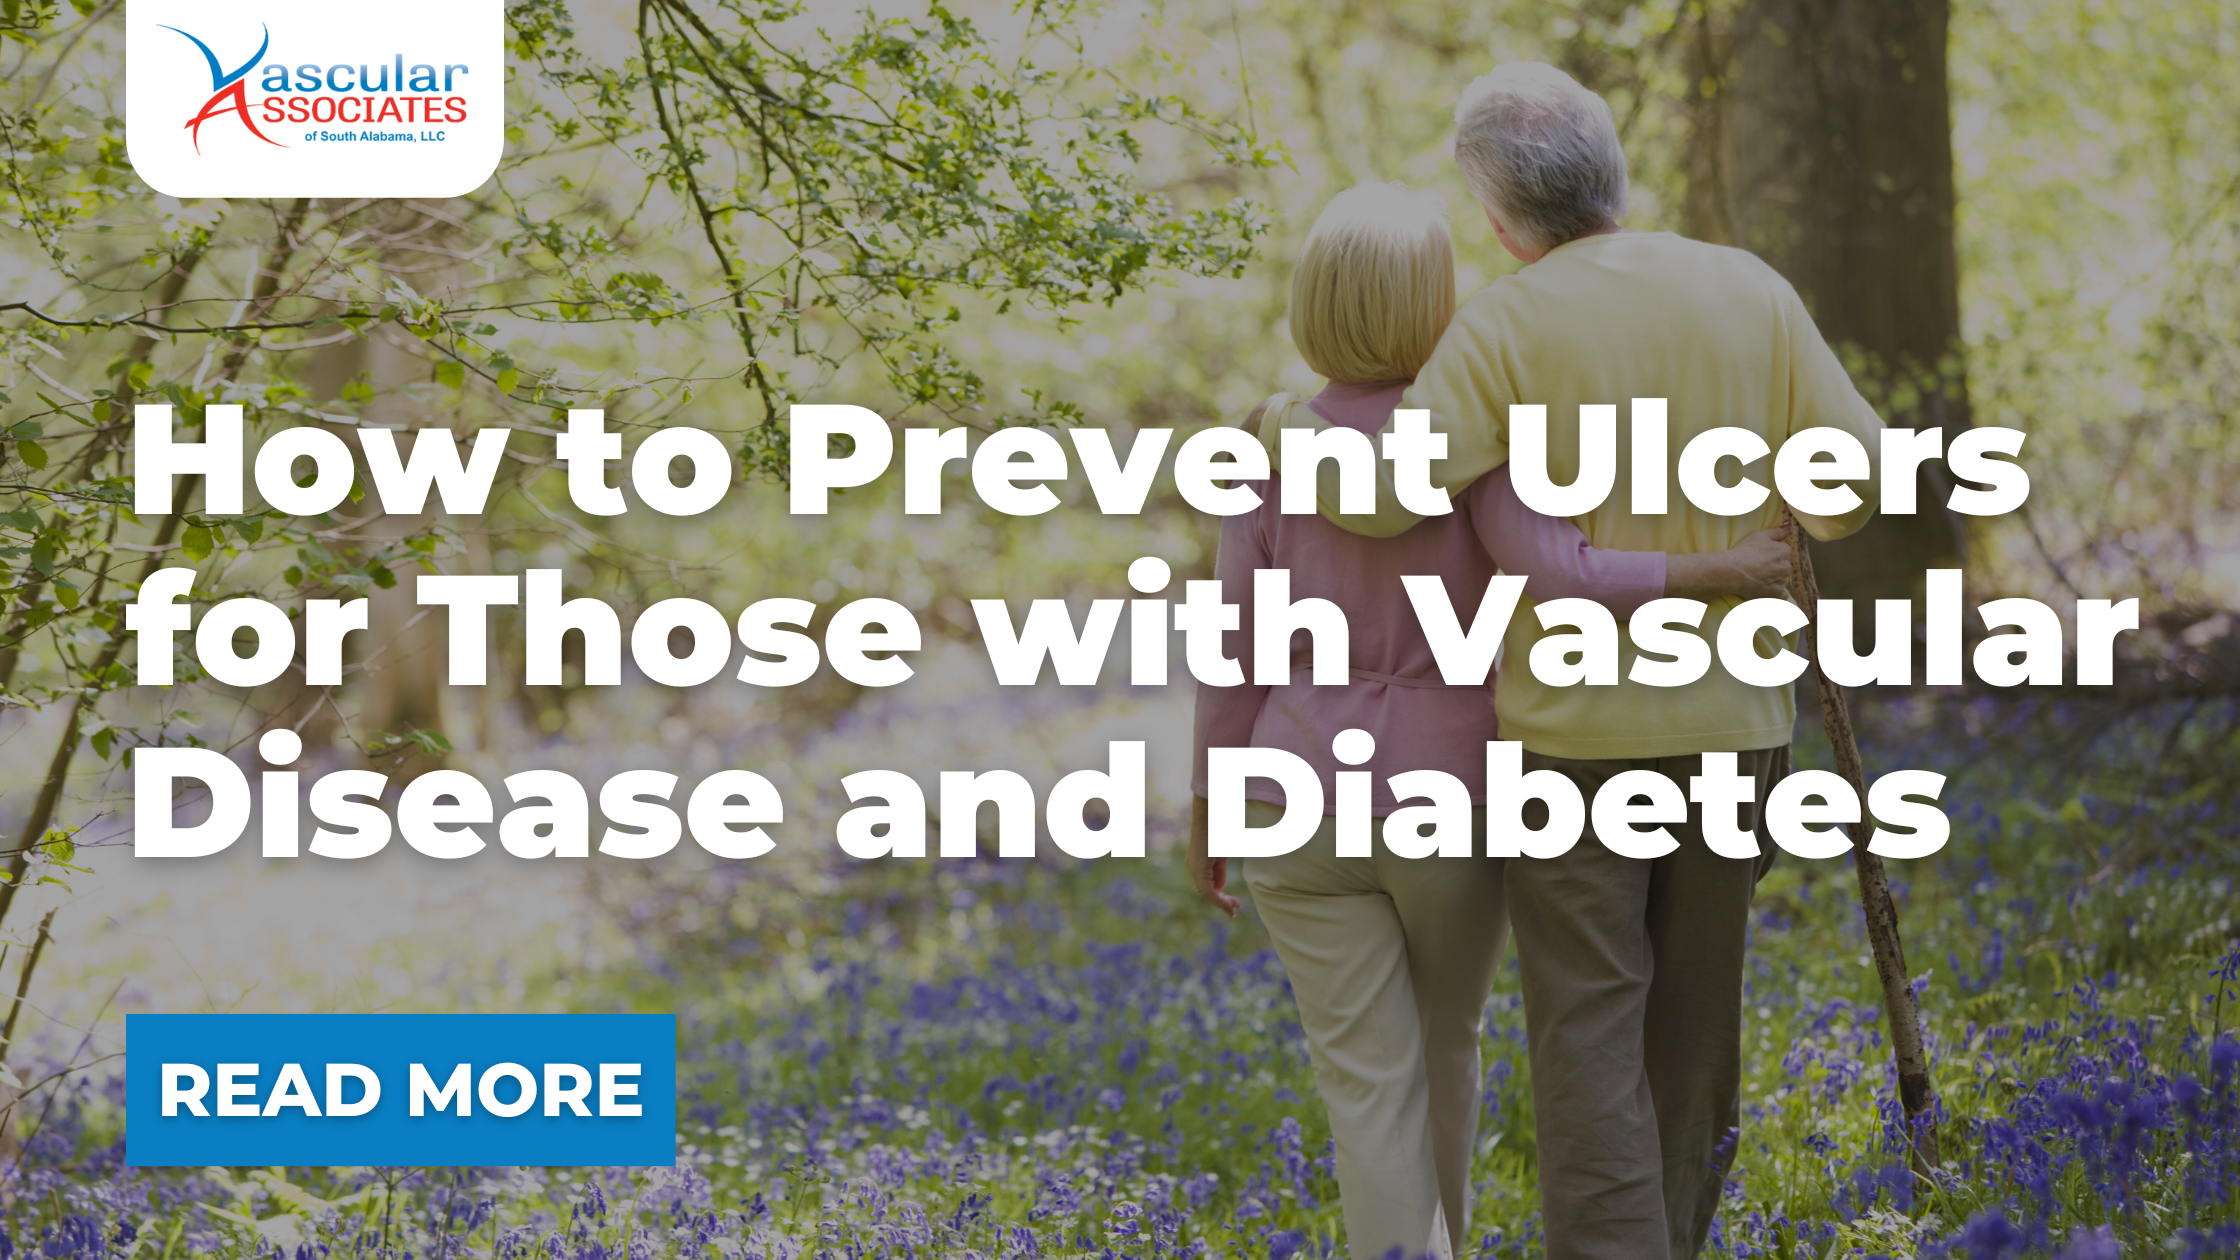 Vascular Blog - How to Prevent Ulcers for Those with Vascular Disease and Diabetes.png